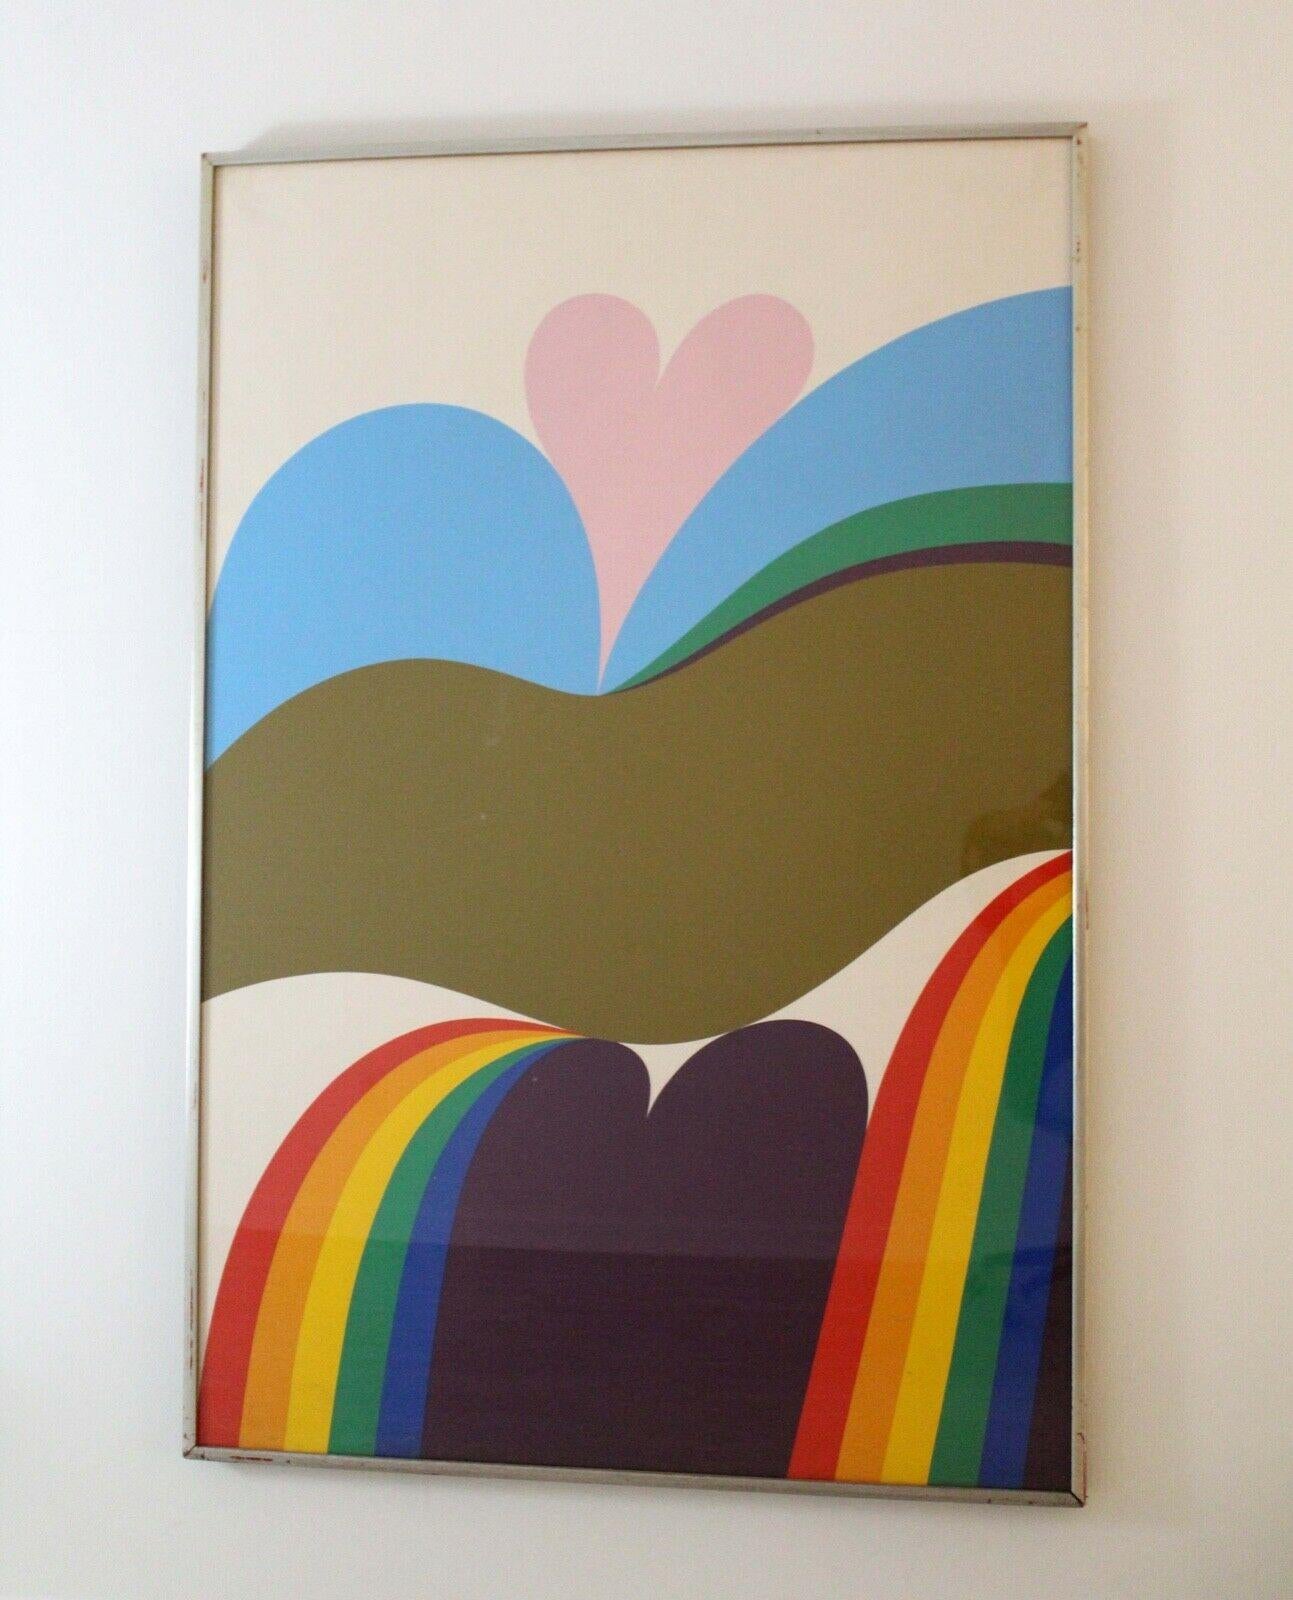 Le Shoppe Too in Michigan is offering a fantastic silkscreen print titled Heartrise by Carol Summers. Signed in pencil with an annotation of 51/75, circa 1970s. The bright swirling rainbow and heart motif makes a groovy statement, which would be